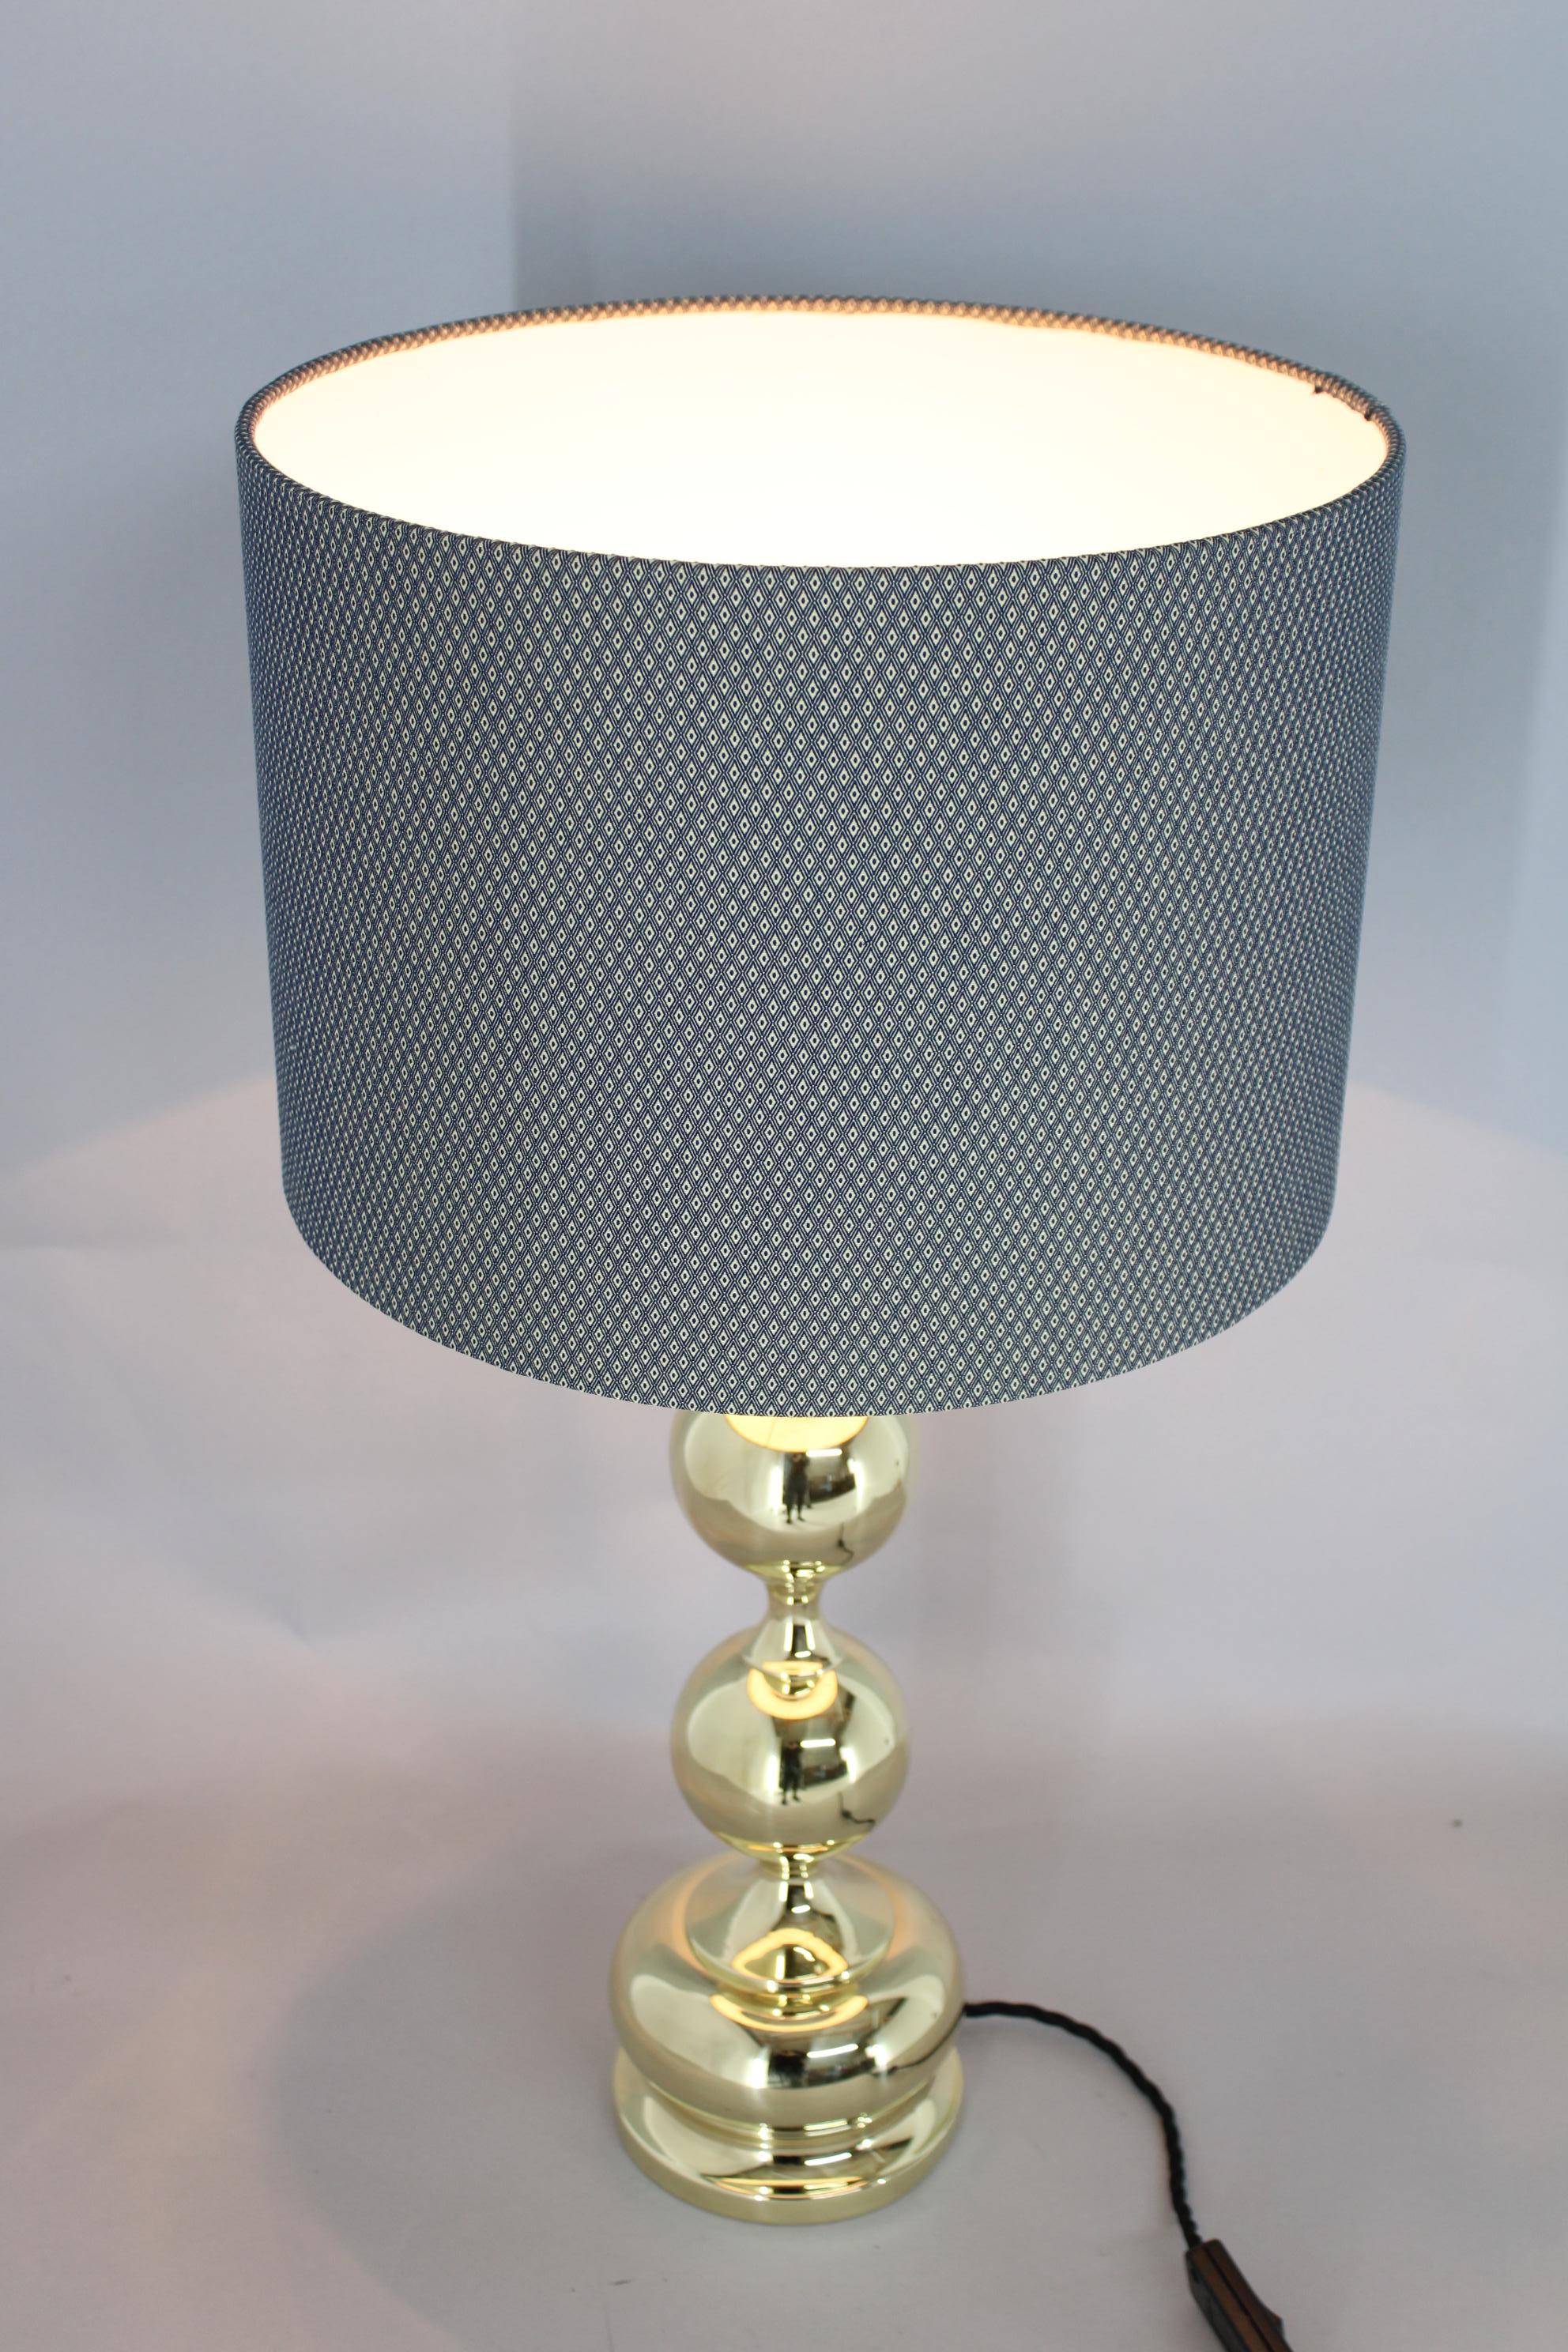  - Repolished
 - Rewired 
- New lamp shade